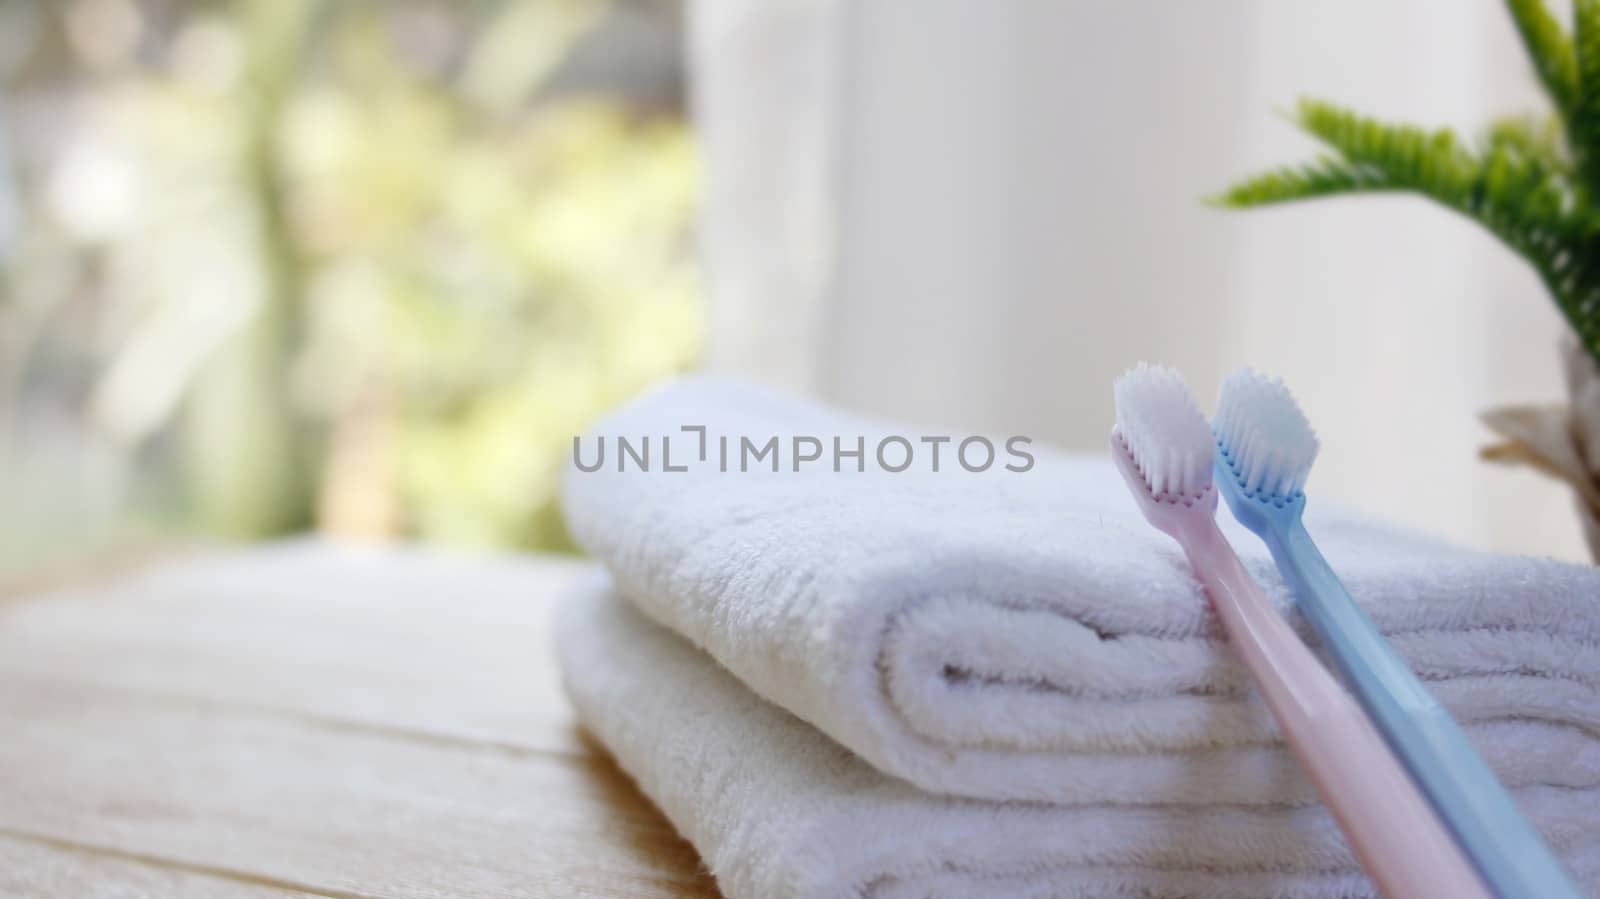 Toothbrush on a towel